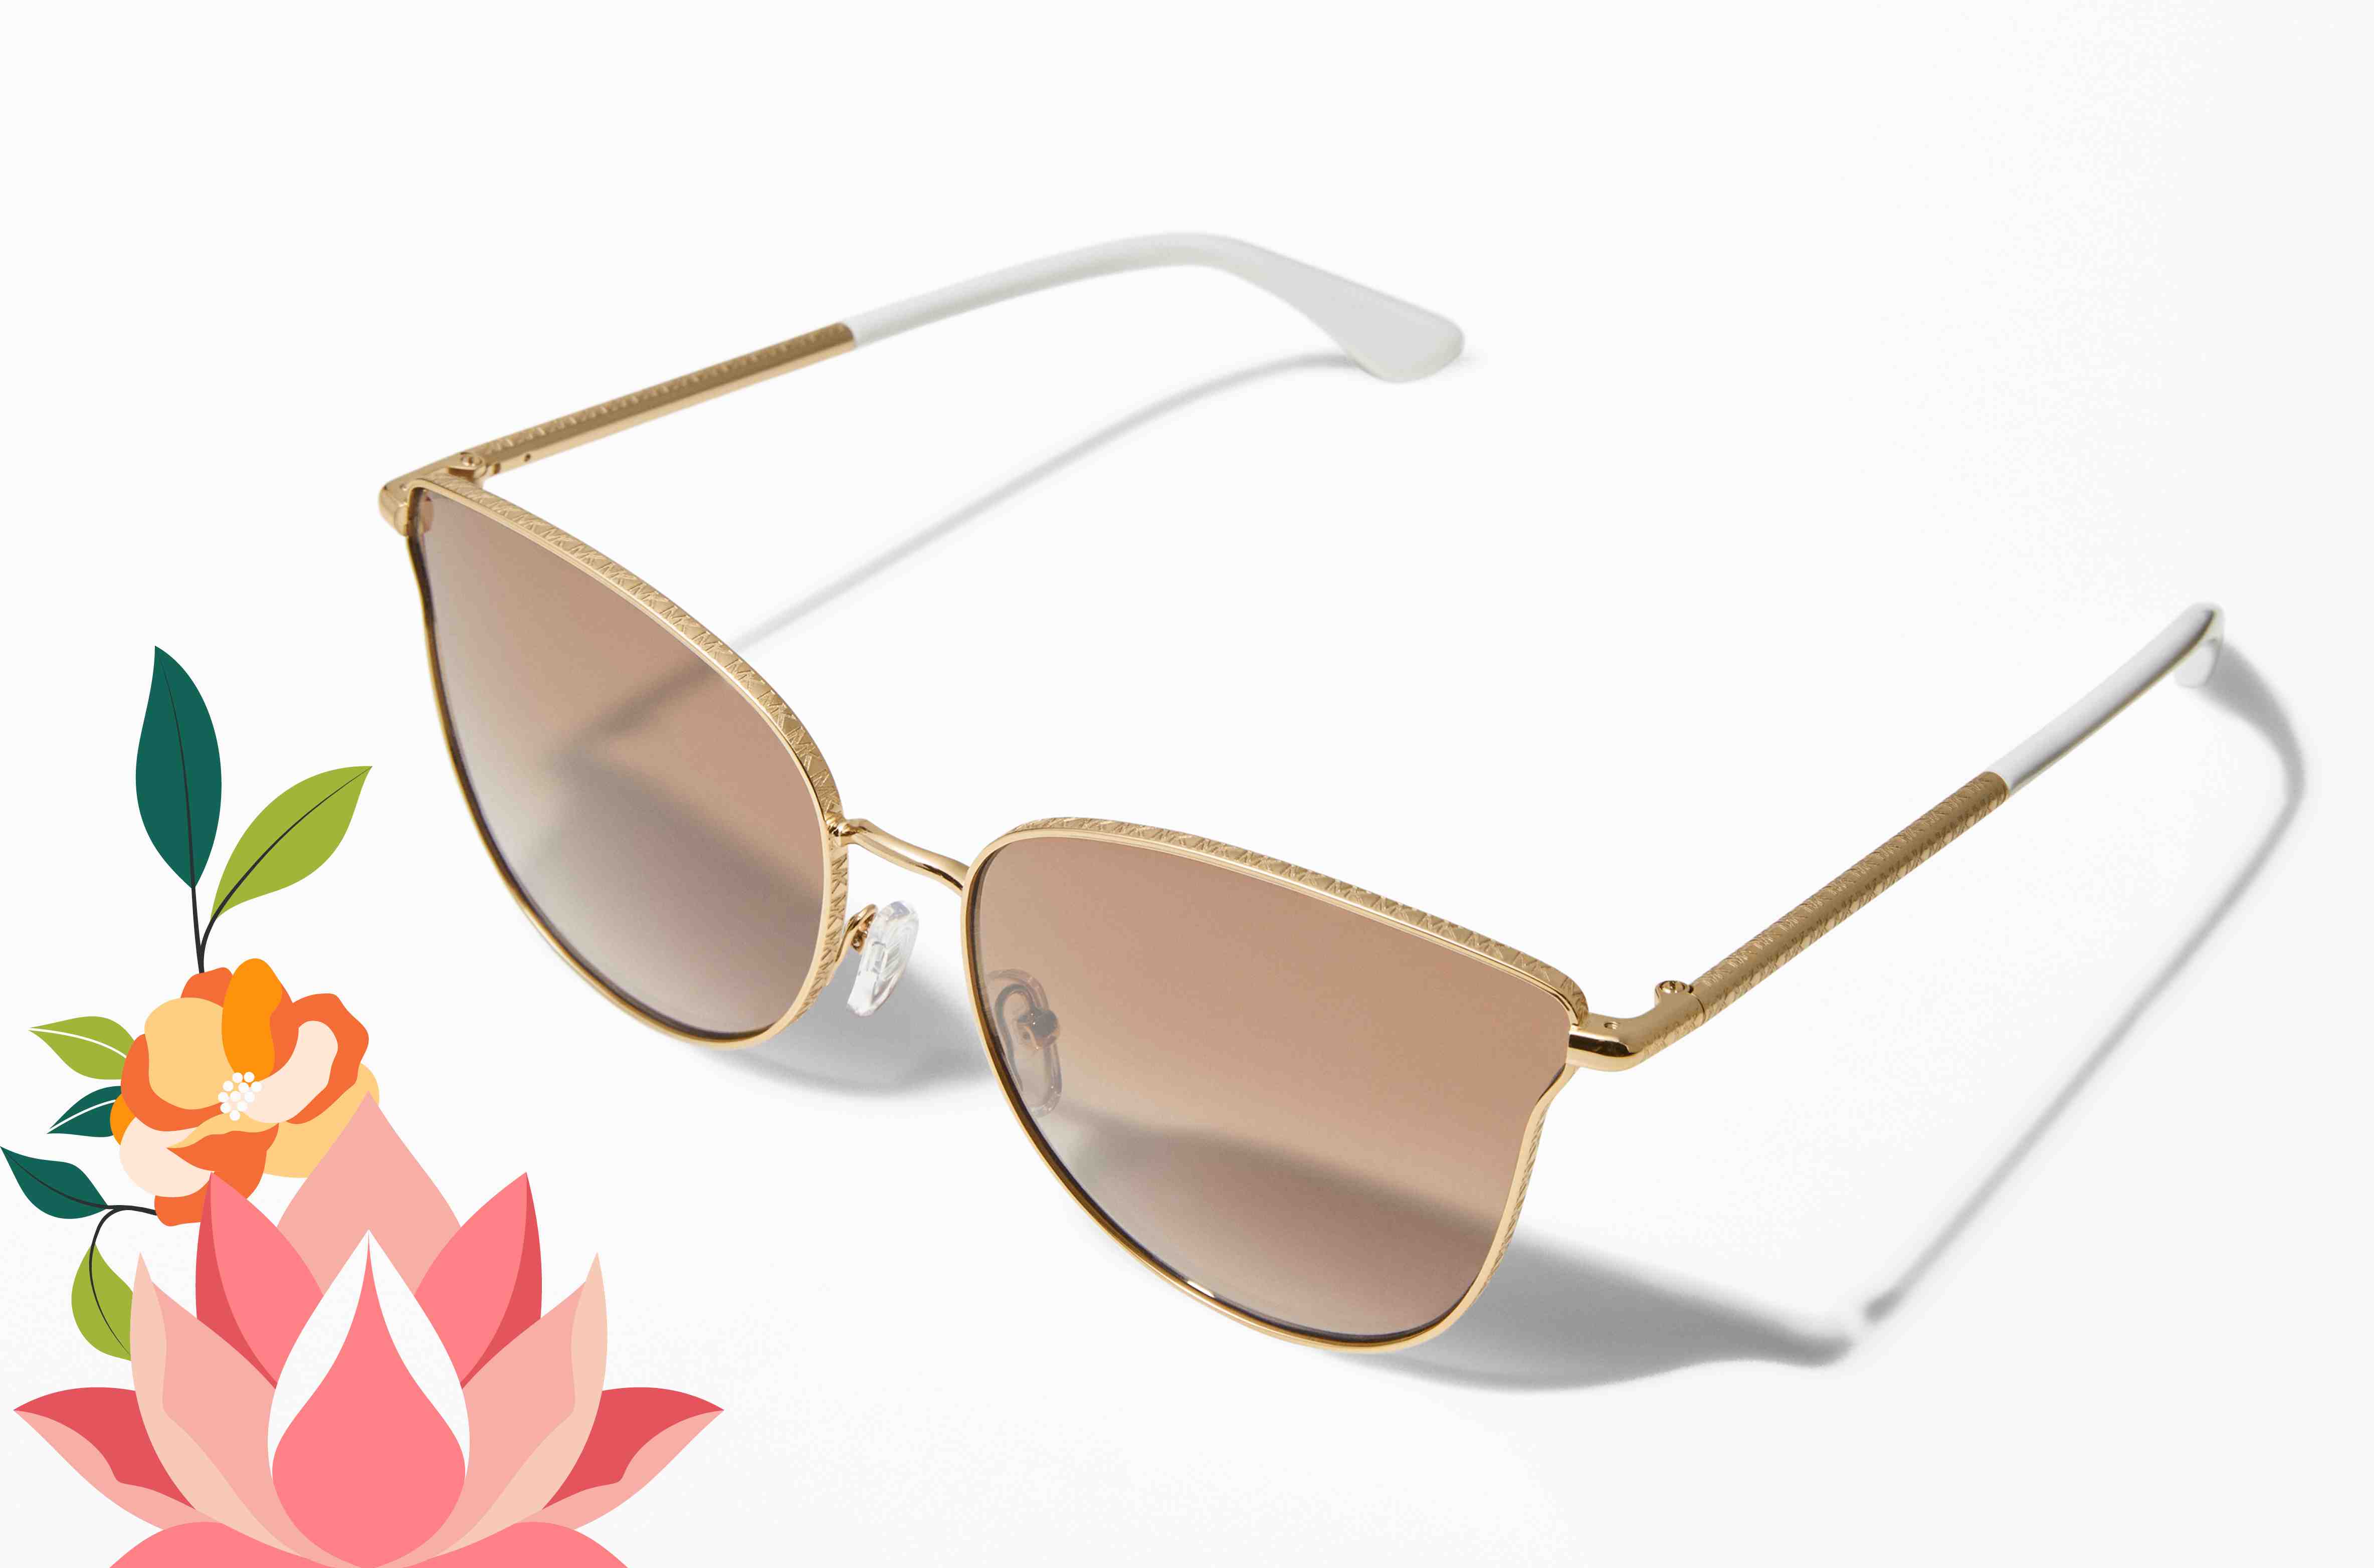  Michael Kors launches new festive eyewear collection for India